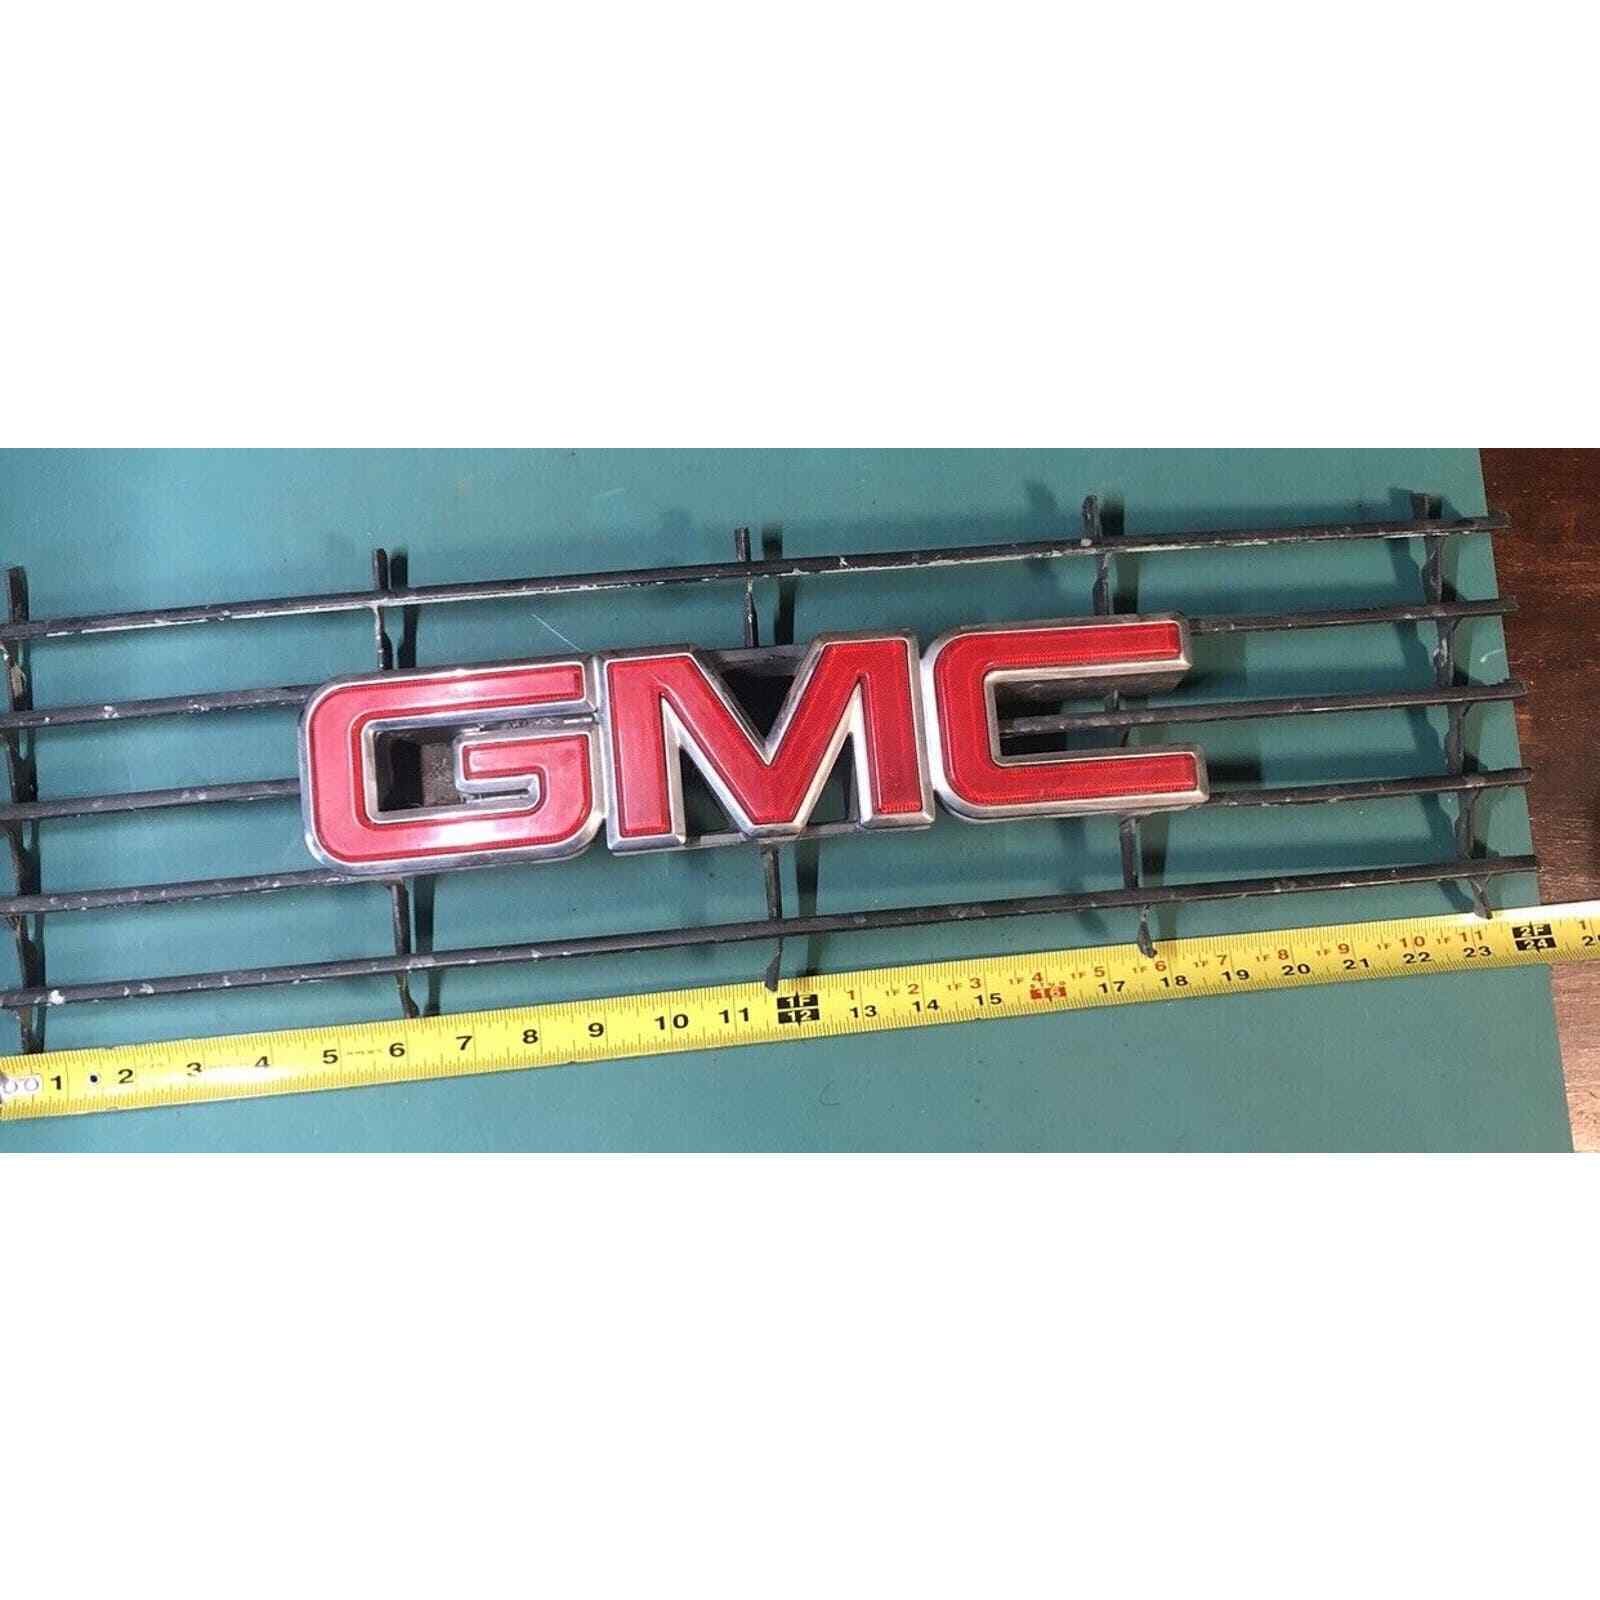 GMC Truck Front Grill Vintage Man Cave Garage Pick-Up Gift Christmas Wall Decor